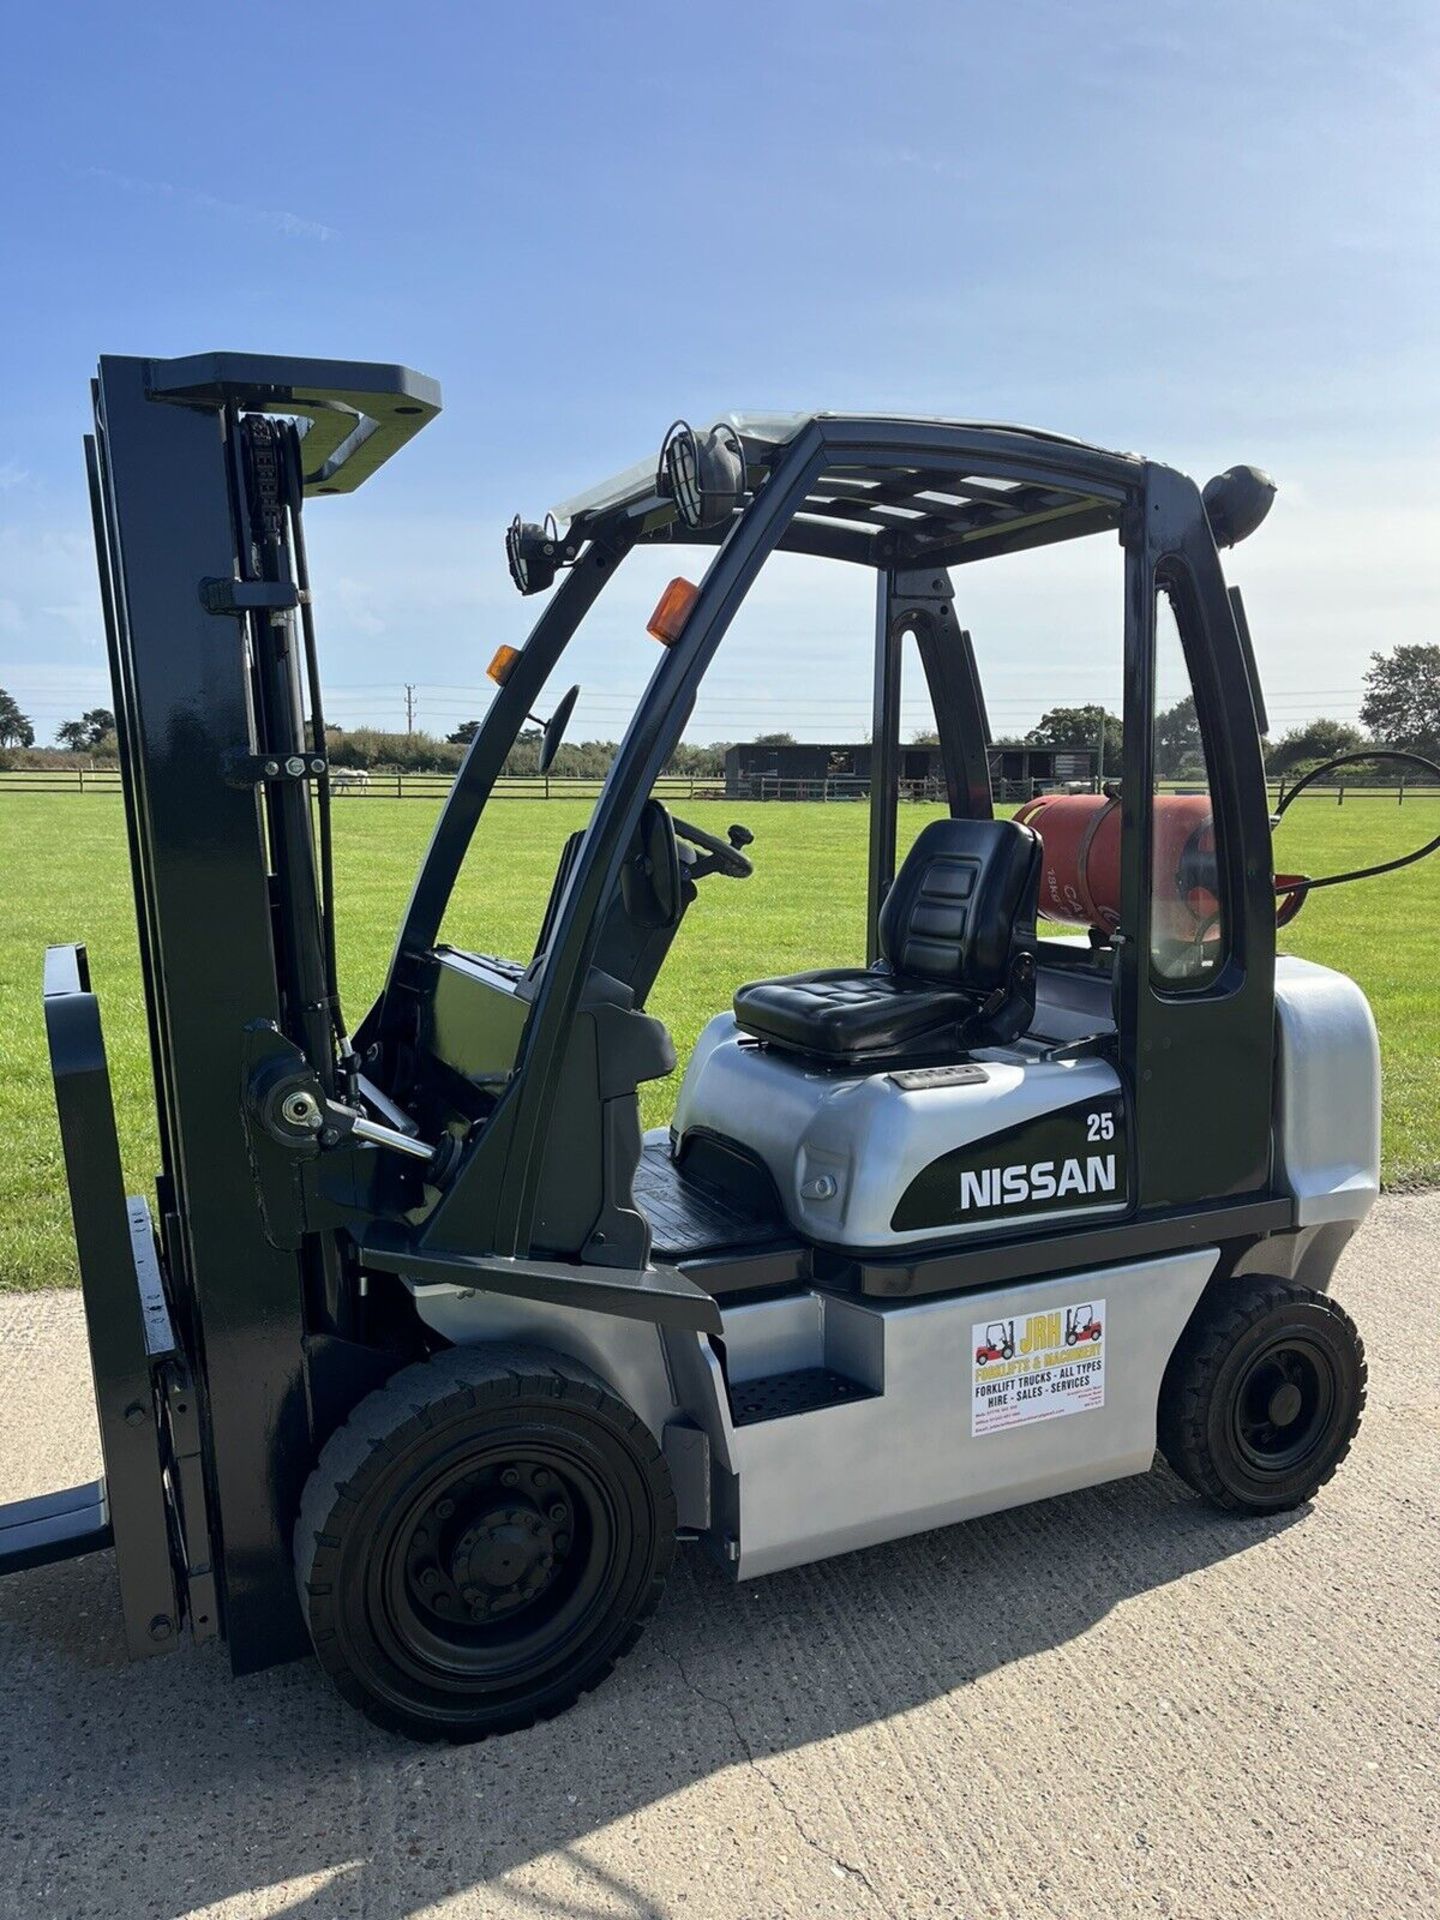 NISSAN, 2.5 Ton Gas Forklift Truck (Container Spec) - Image 6 of 6